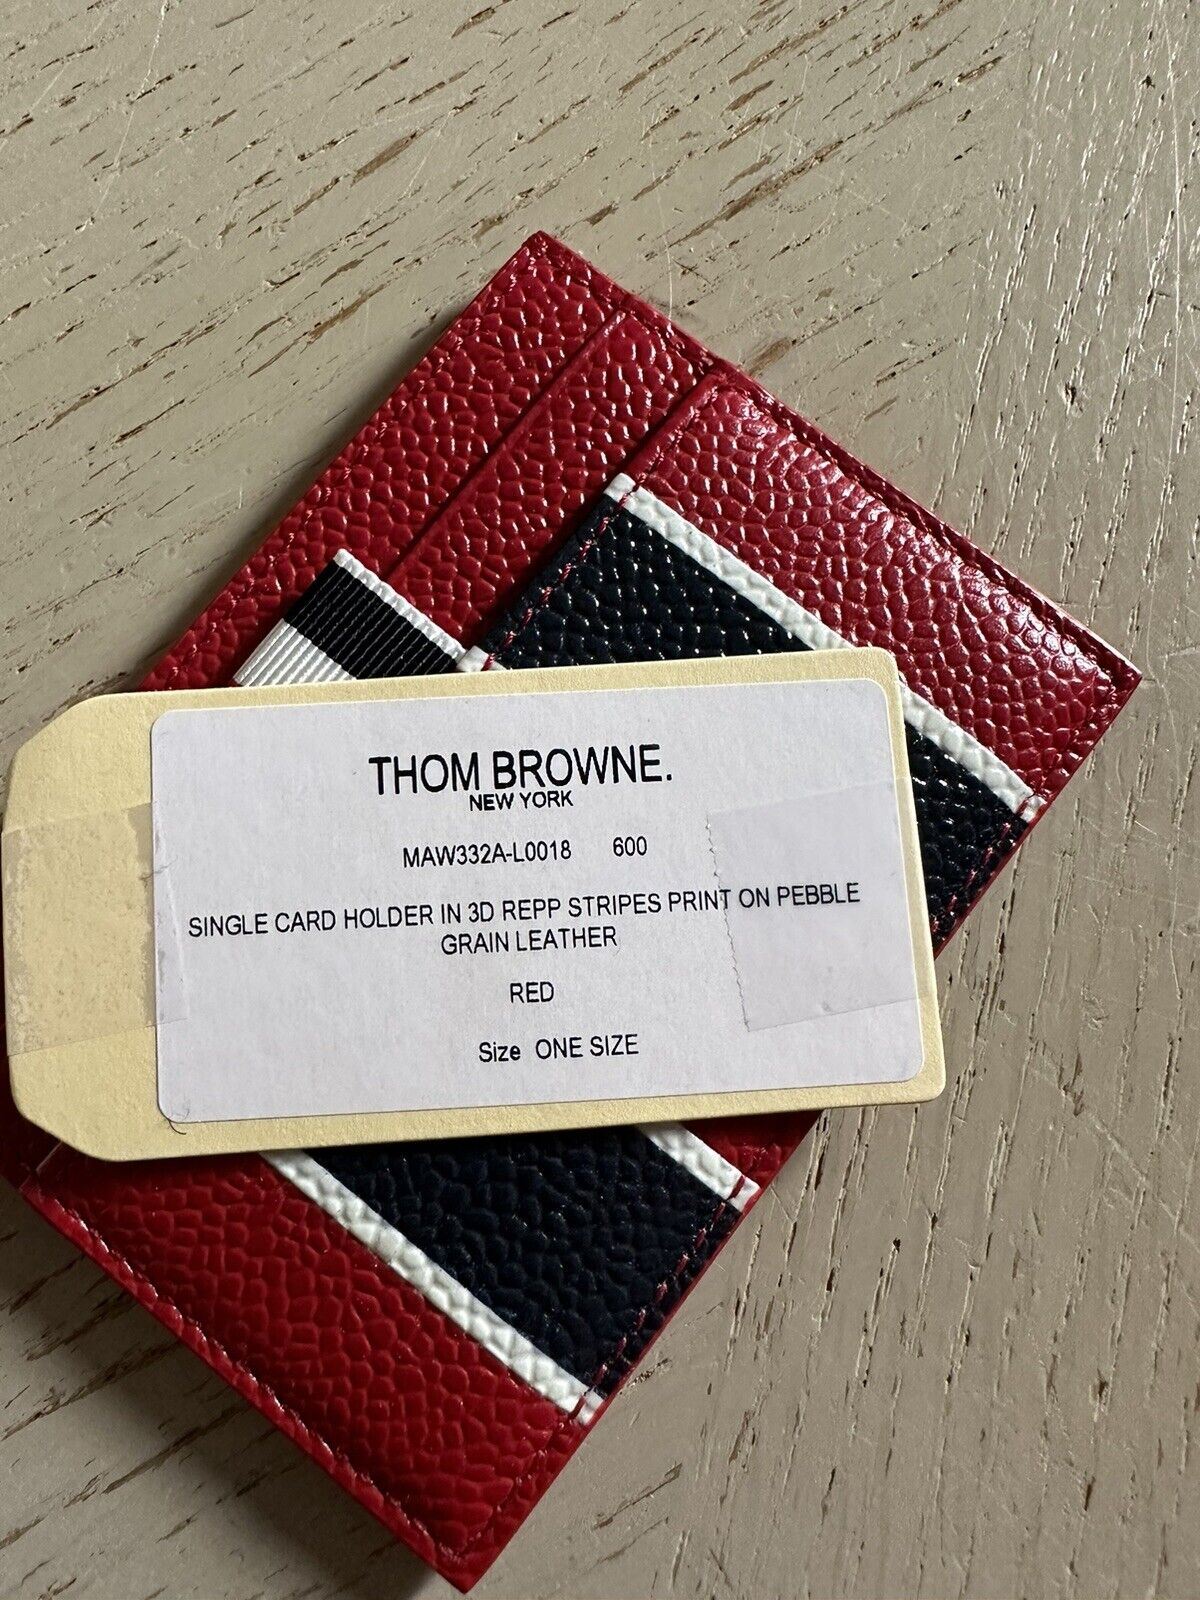 New $350 Thom Browne Men's Stripe Pebble Leather Single Card Holder Red Italy